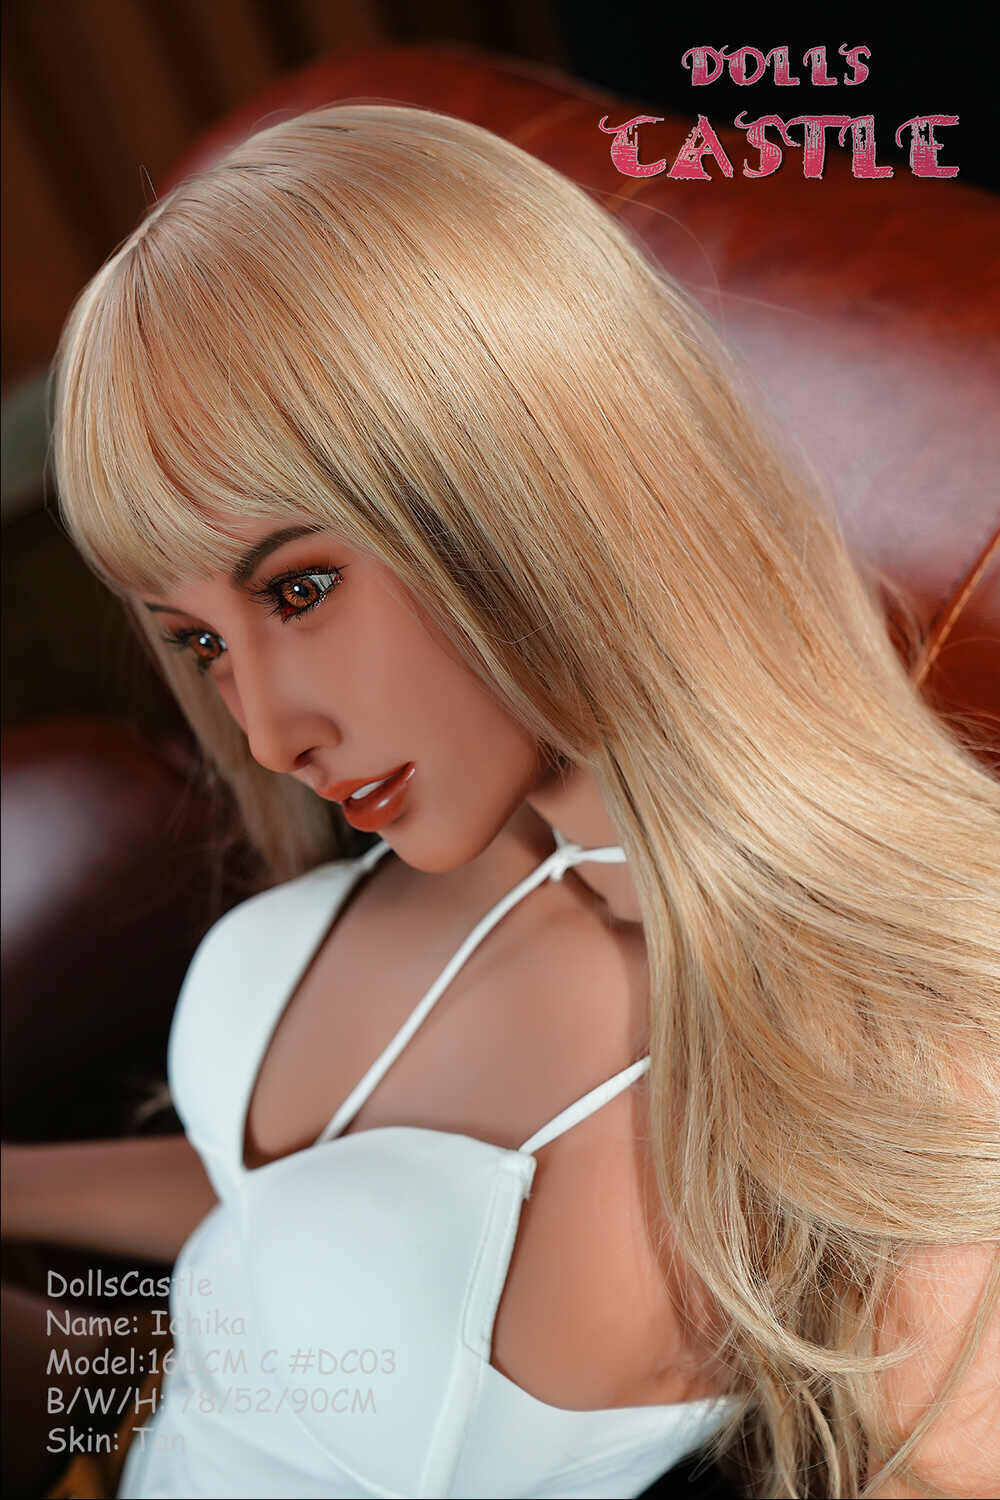 Alaura - E-Cup Pretty Dolls Castle 163cm(5ft4) Love Dolls Real Sex Doll Demonstration (US In Stock) image10